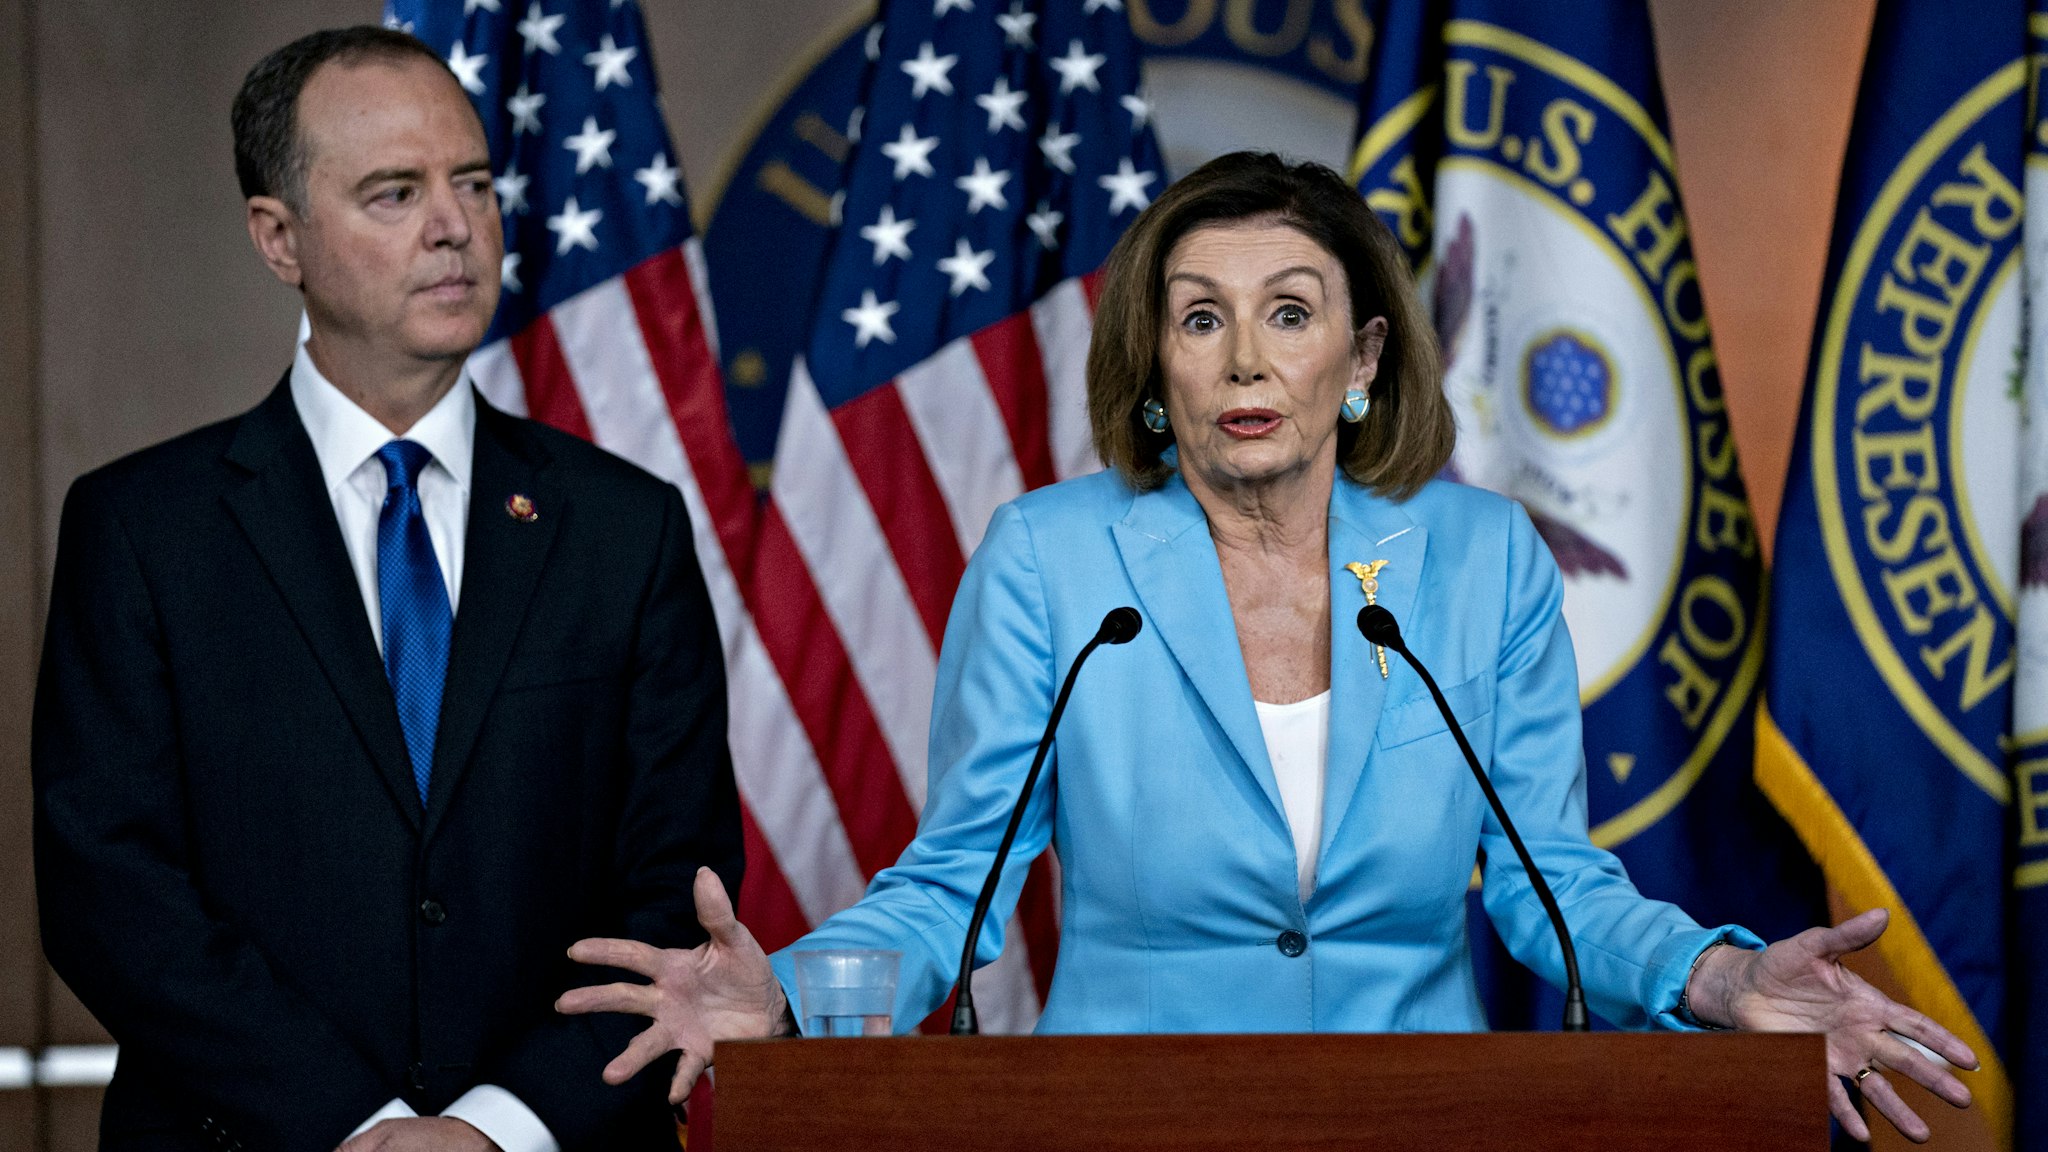 U.S. House Speaker Nancy Pelosi, a Democrat from California, speaks as Representative Adam Schiff, a Democrat from California and chairman of the House Intelligence Committee, left, listens during a news conference on Capitol Hill in Washington, D.C., U.S., on Wednesday, Oct. 2, 2019. Three House committee chairmen threatened on Wednesday to subpoena the White House if it fails to adhere by Friday to document requests related to allegations that President Donald Trump pressured Ukraine into investigating one of his leading political rivals.